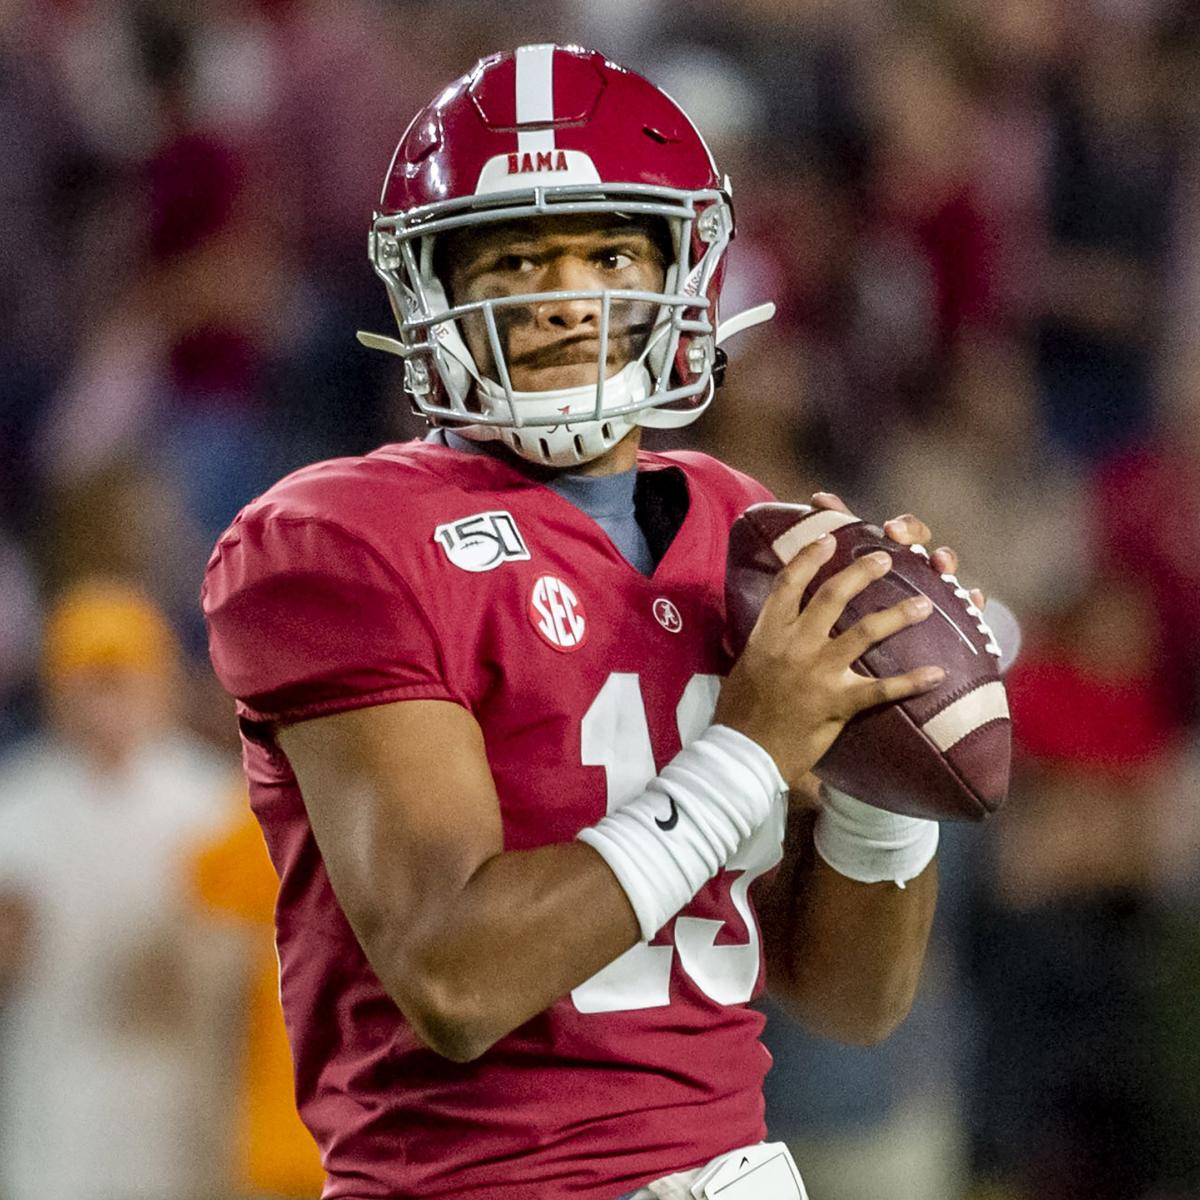 NFL Draft 2020: Where Tua Tagovailoa, Top QBs Are Being Selected